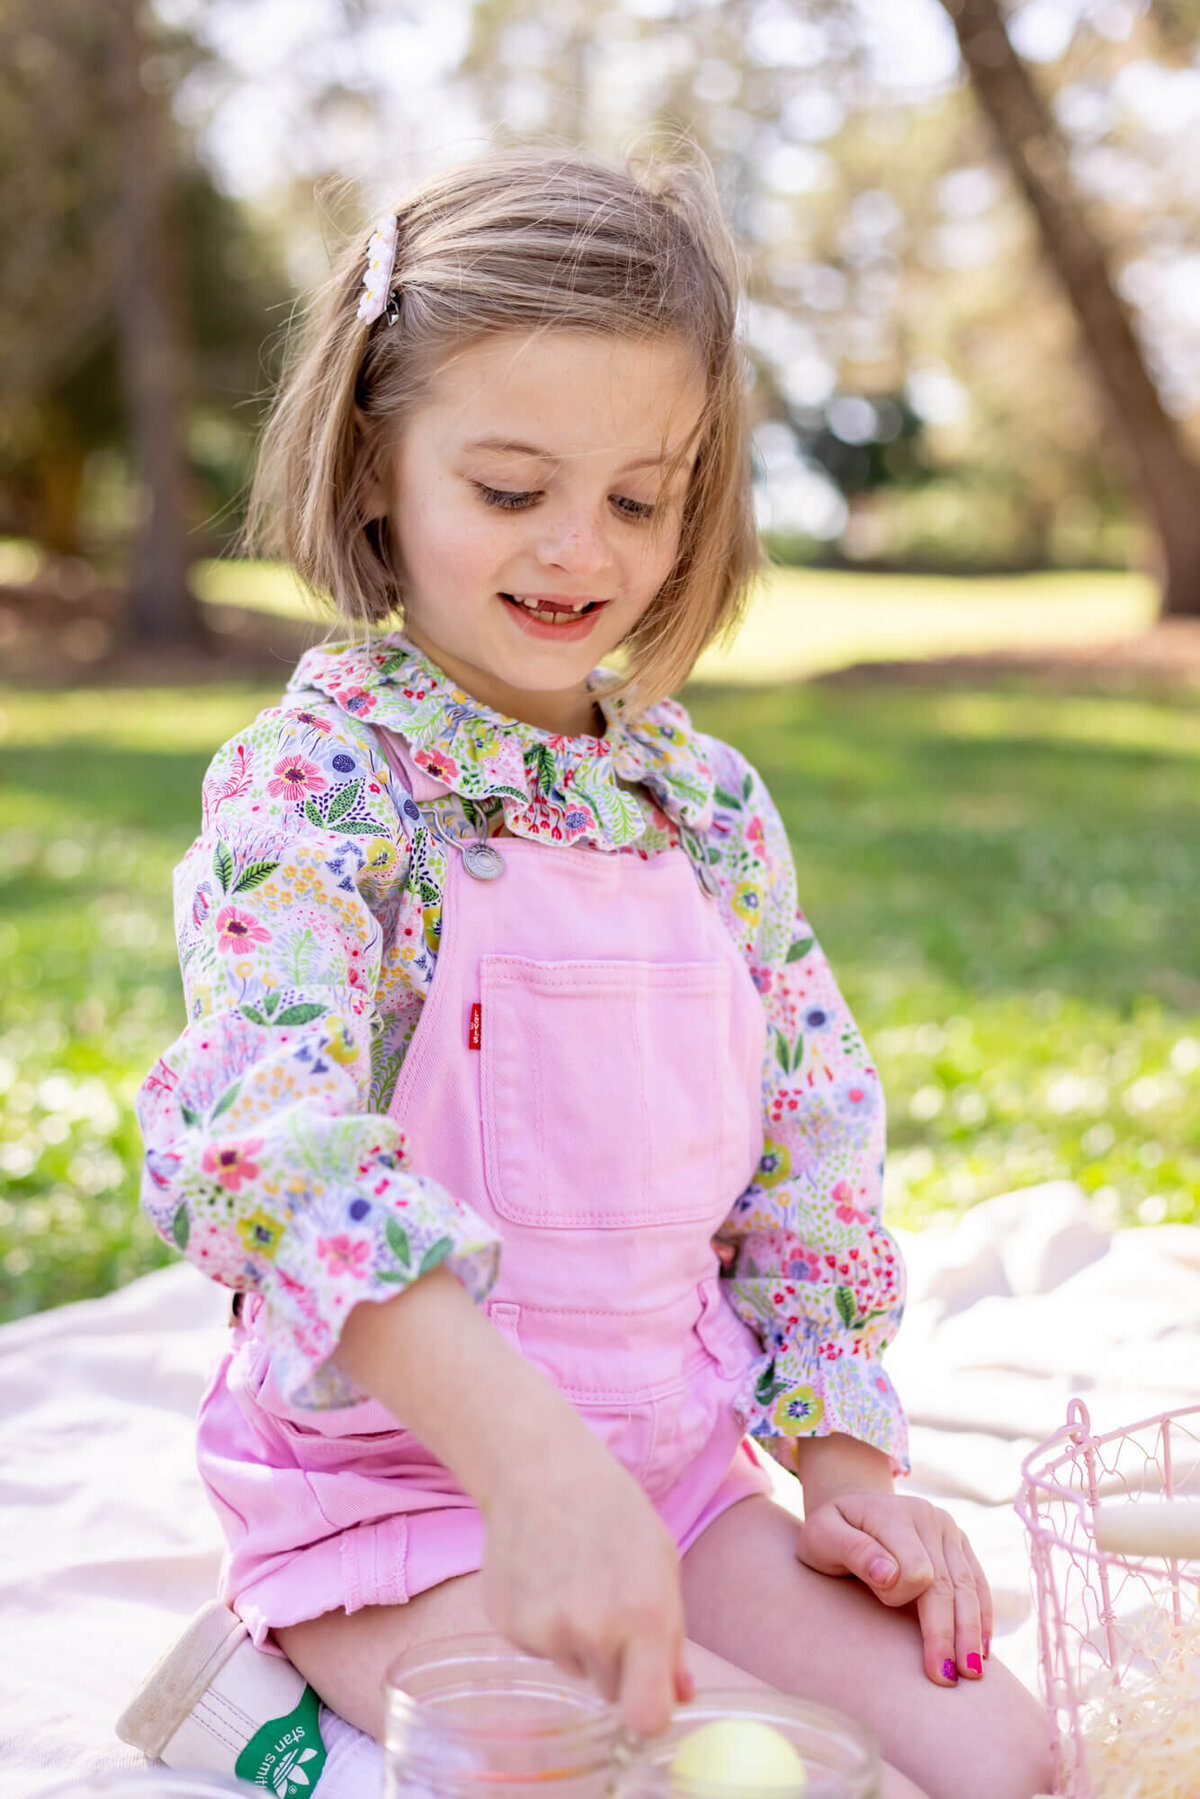 Little girl with blonde bob dyes Easter eggs wearing pink overalls